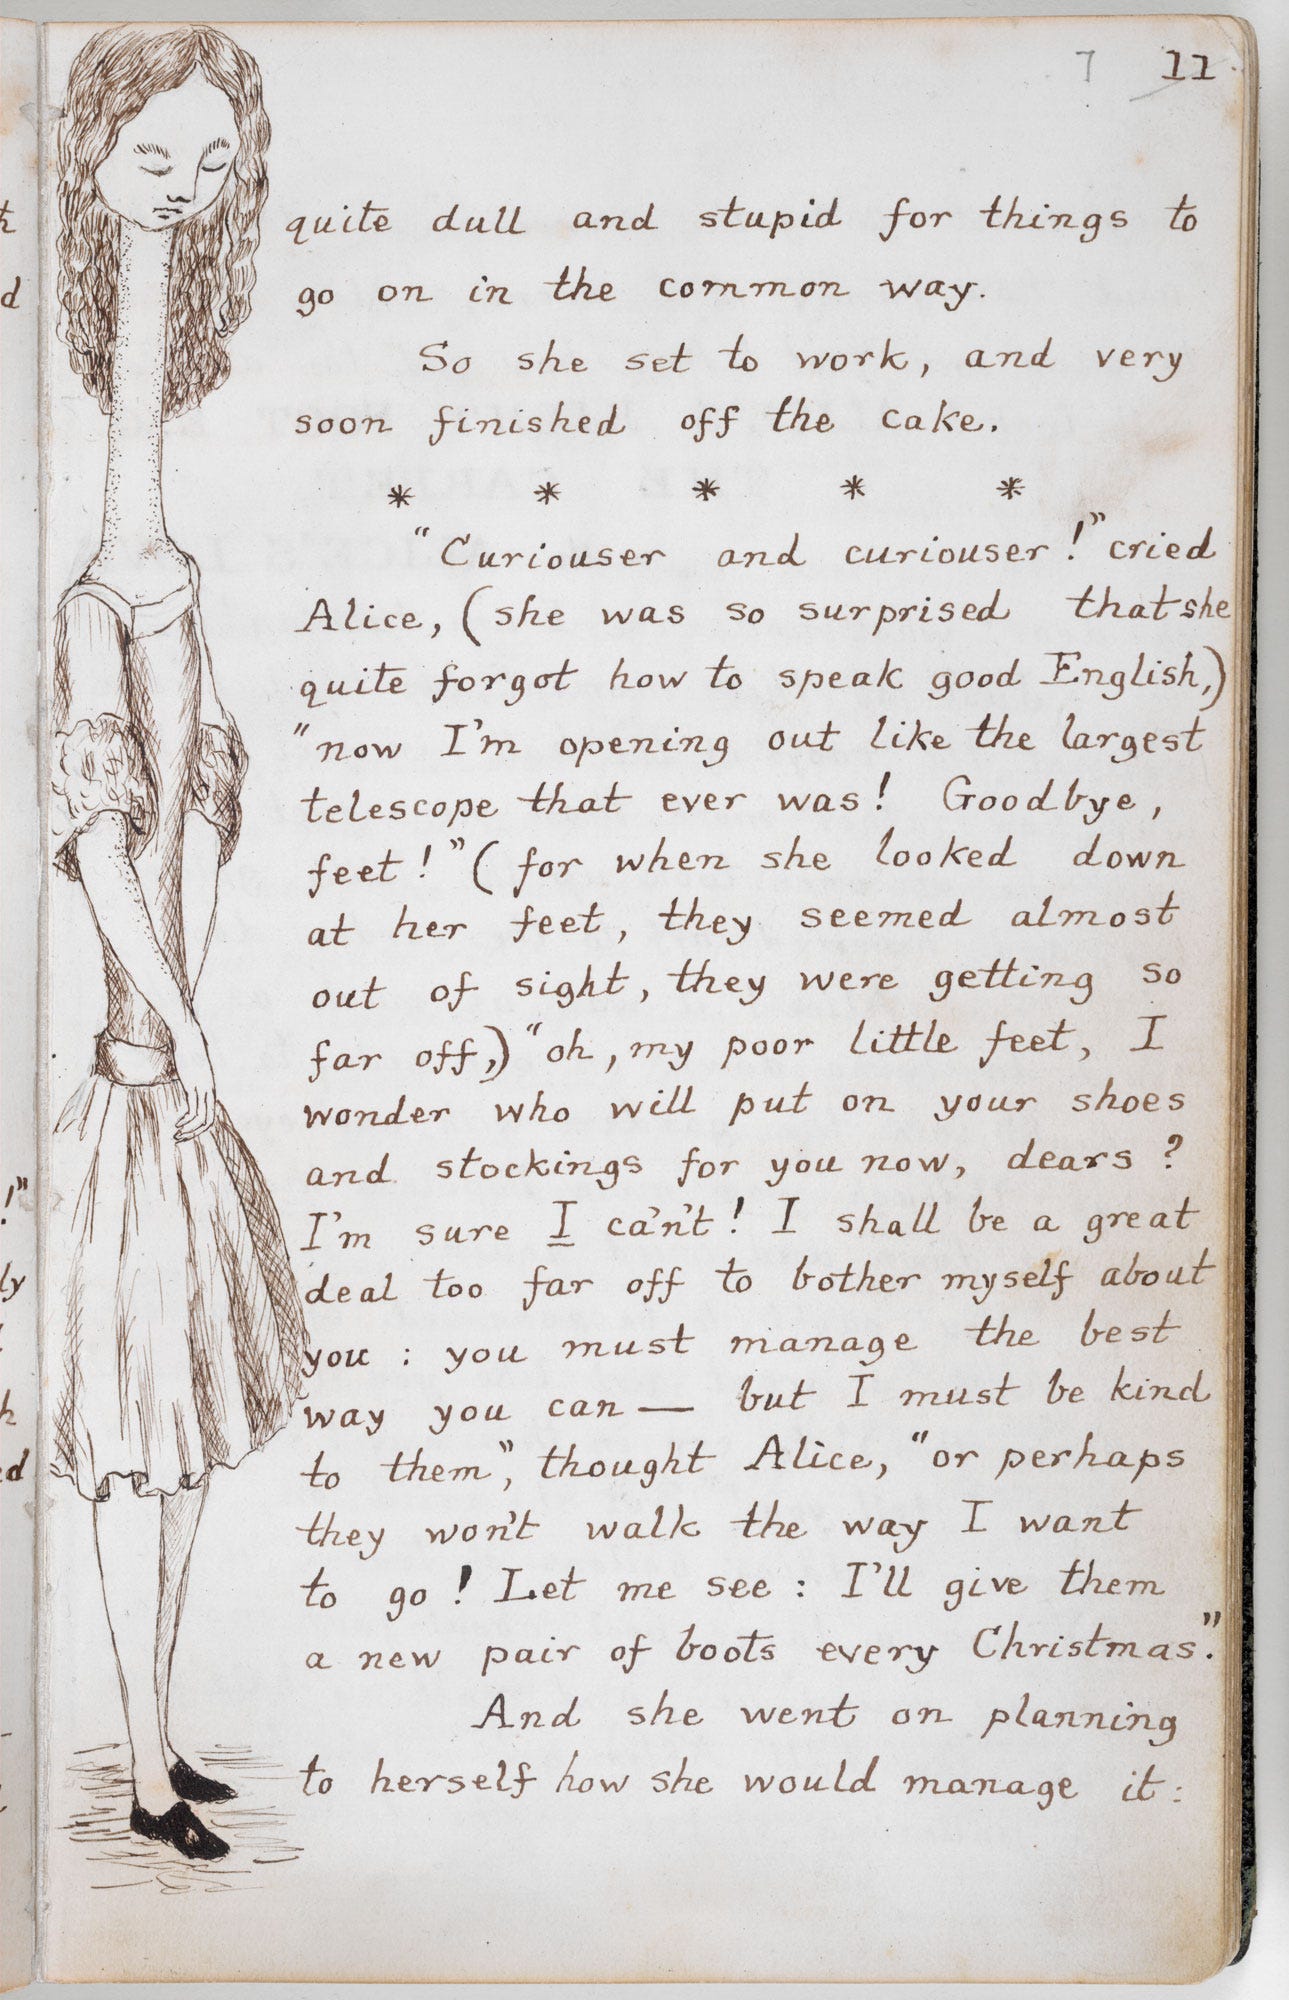 P.S. Lewis Carroll's Alice Notes - by Jillian Hess - Noted